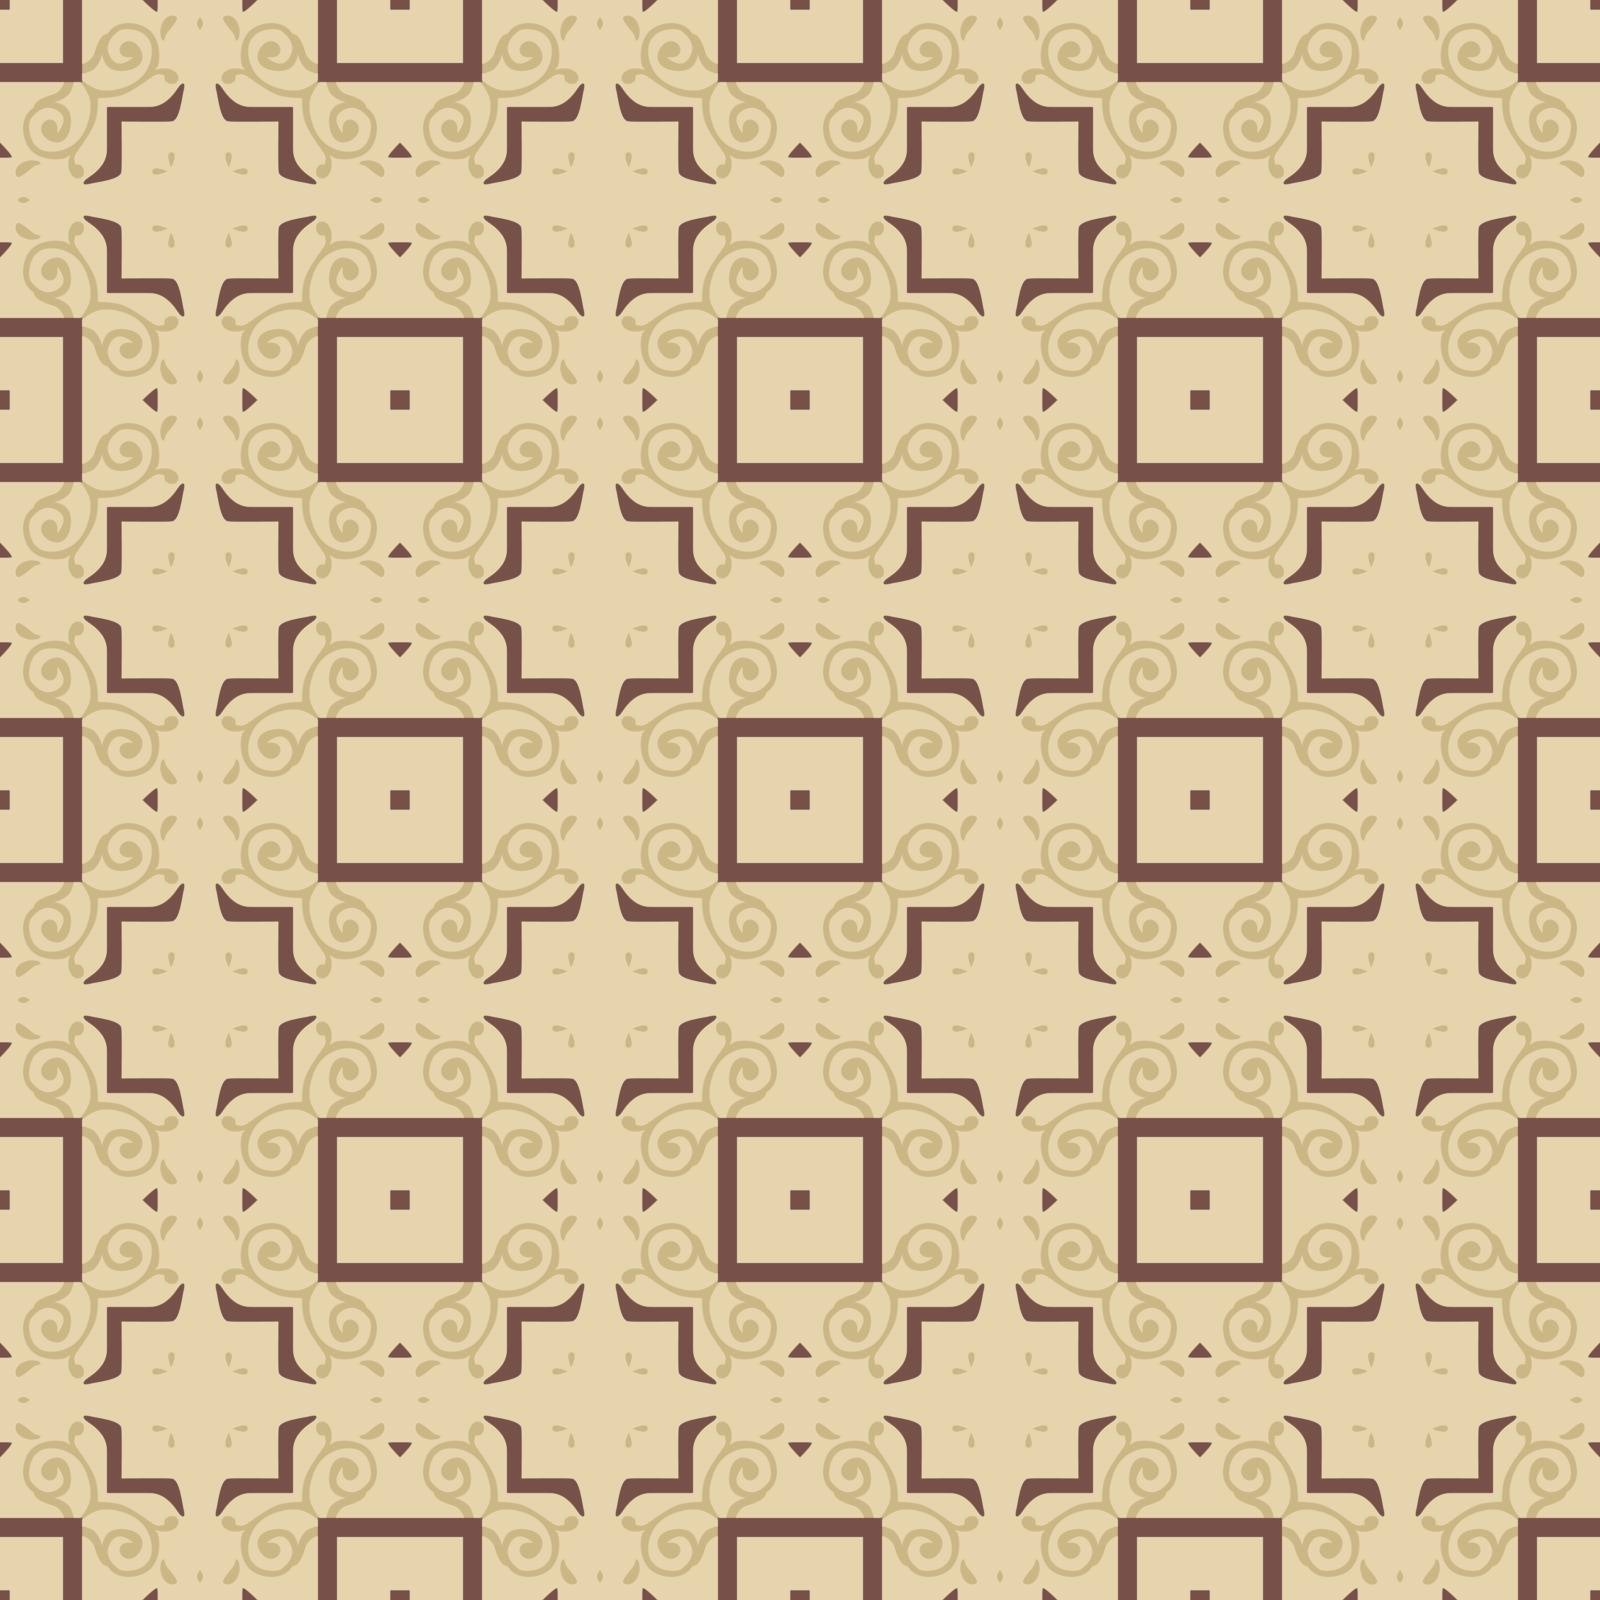 Seamless illustrated pattern made of abstract elements in beige and brown